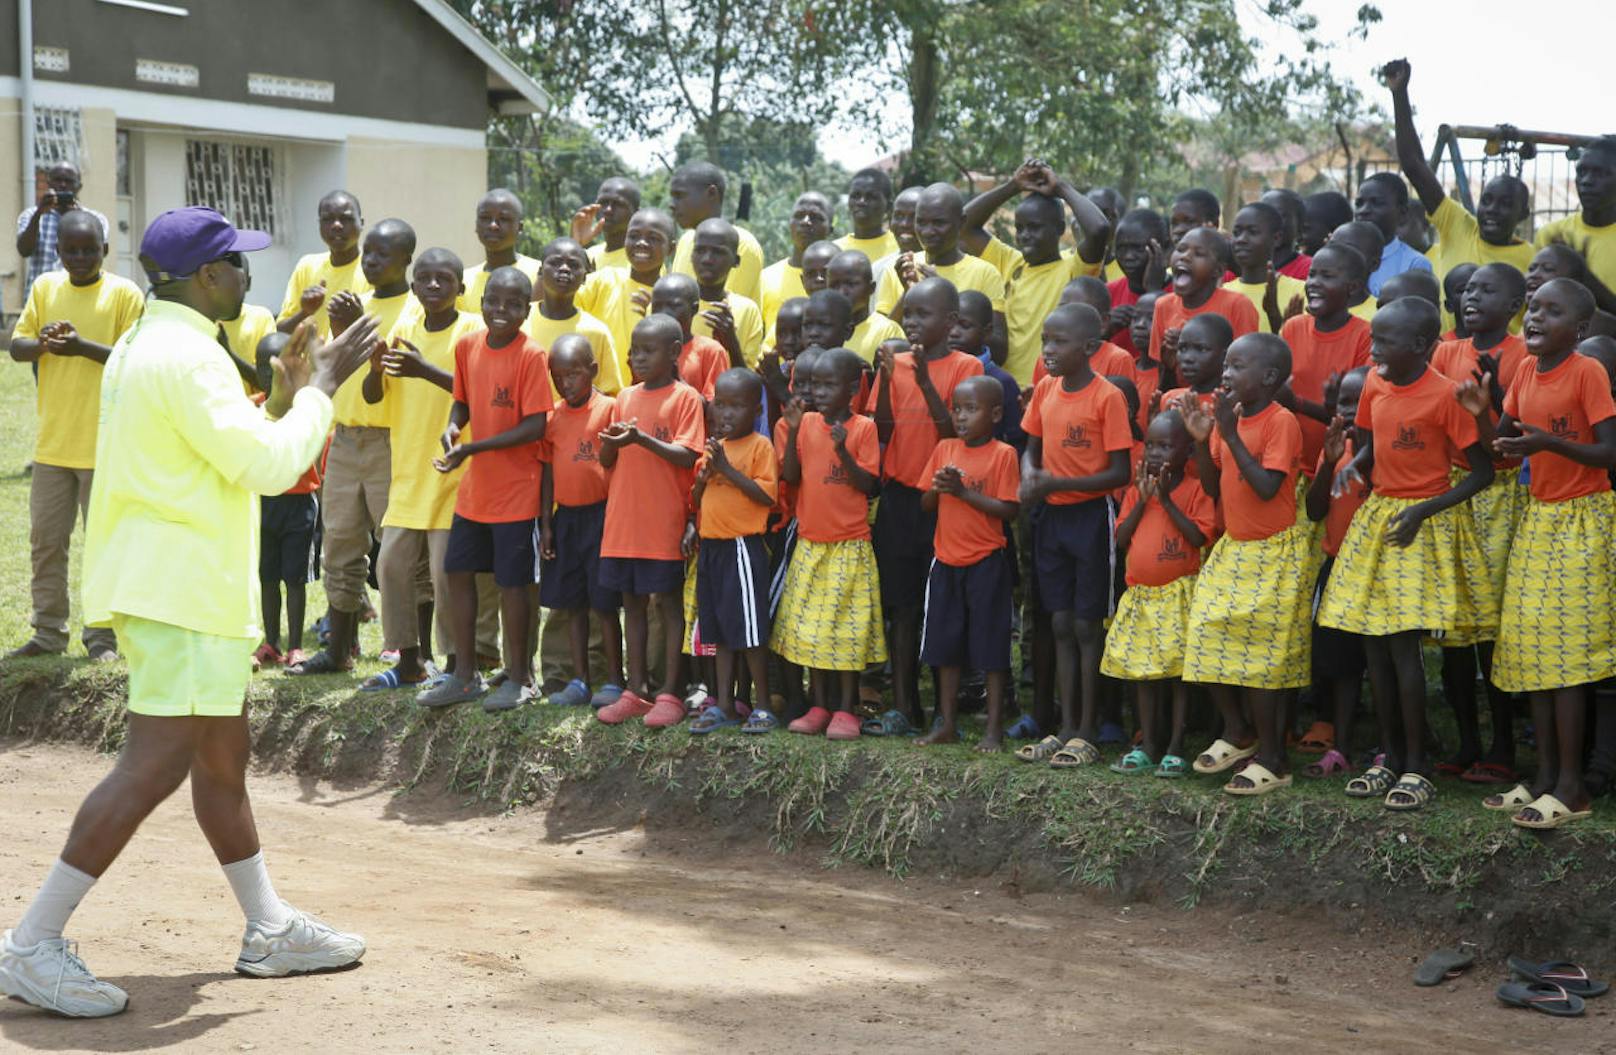 Download von www.picturedesk.com am 18.10.2018 (07:42). 
Rapper Kanye West, left, claps as children sing during a visit to the Uganda Women's Effort to Save Orphans (UWESO) Children's Village in Masulita, outside Kampala, in Uganda Tuesday, Oct. 16, 2018. (AP Photo/Stephen Wandera) - 20181015_PD9793